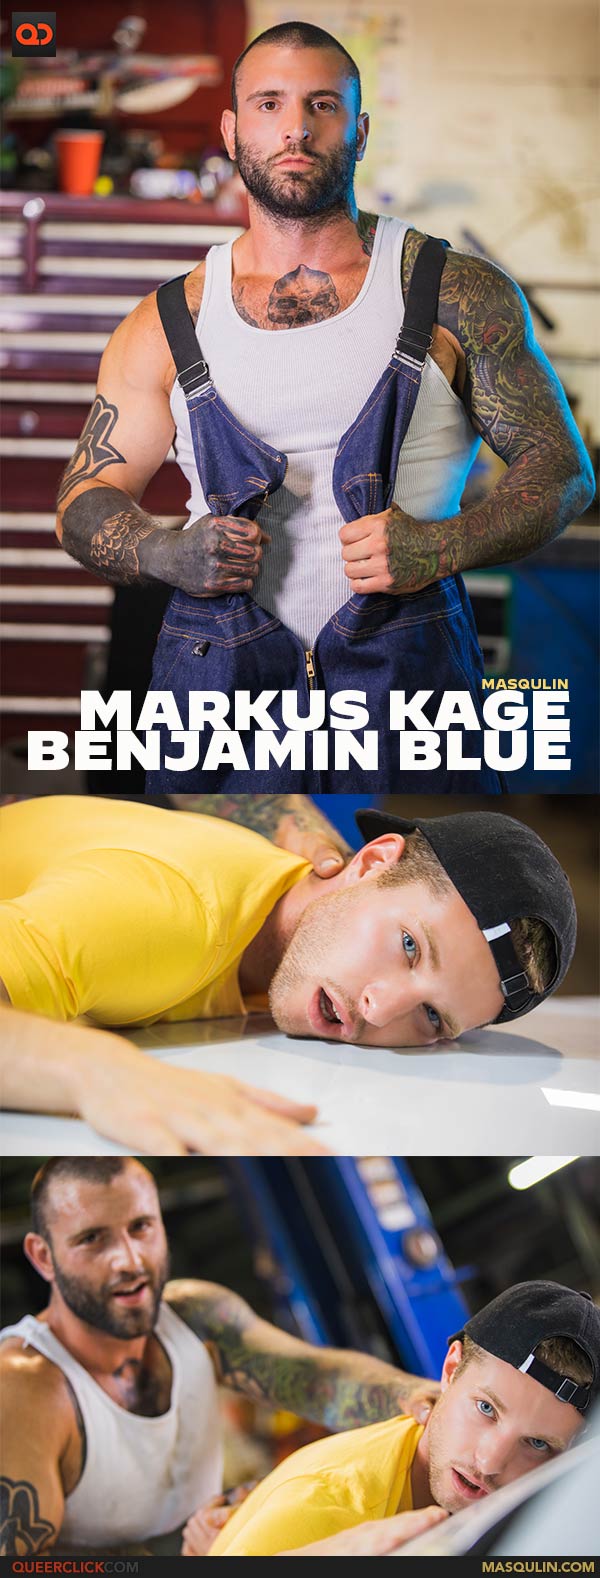 Masqulin: Markus Kage and Benjamin Blue - ONLY $8.33 PER MONTH!